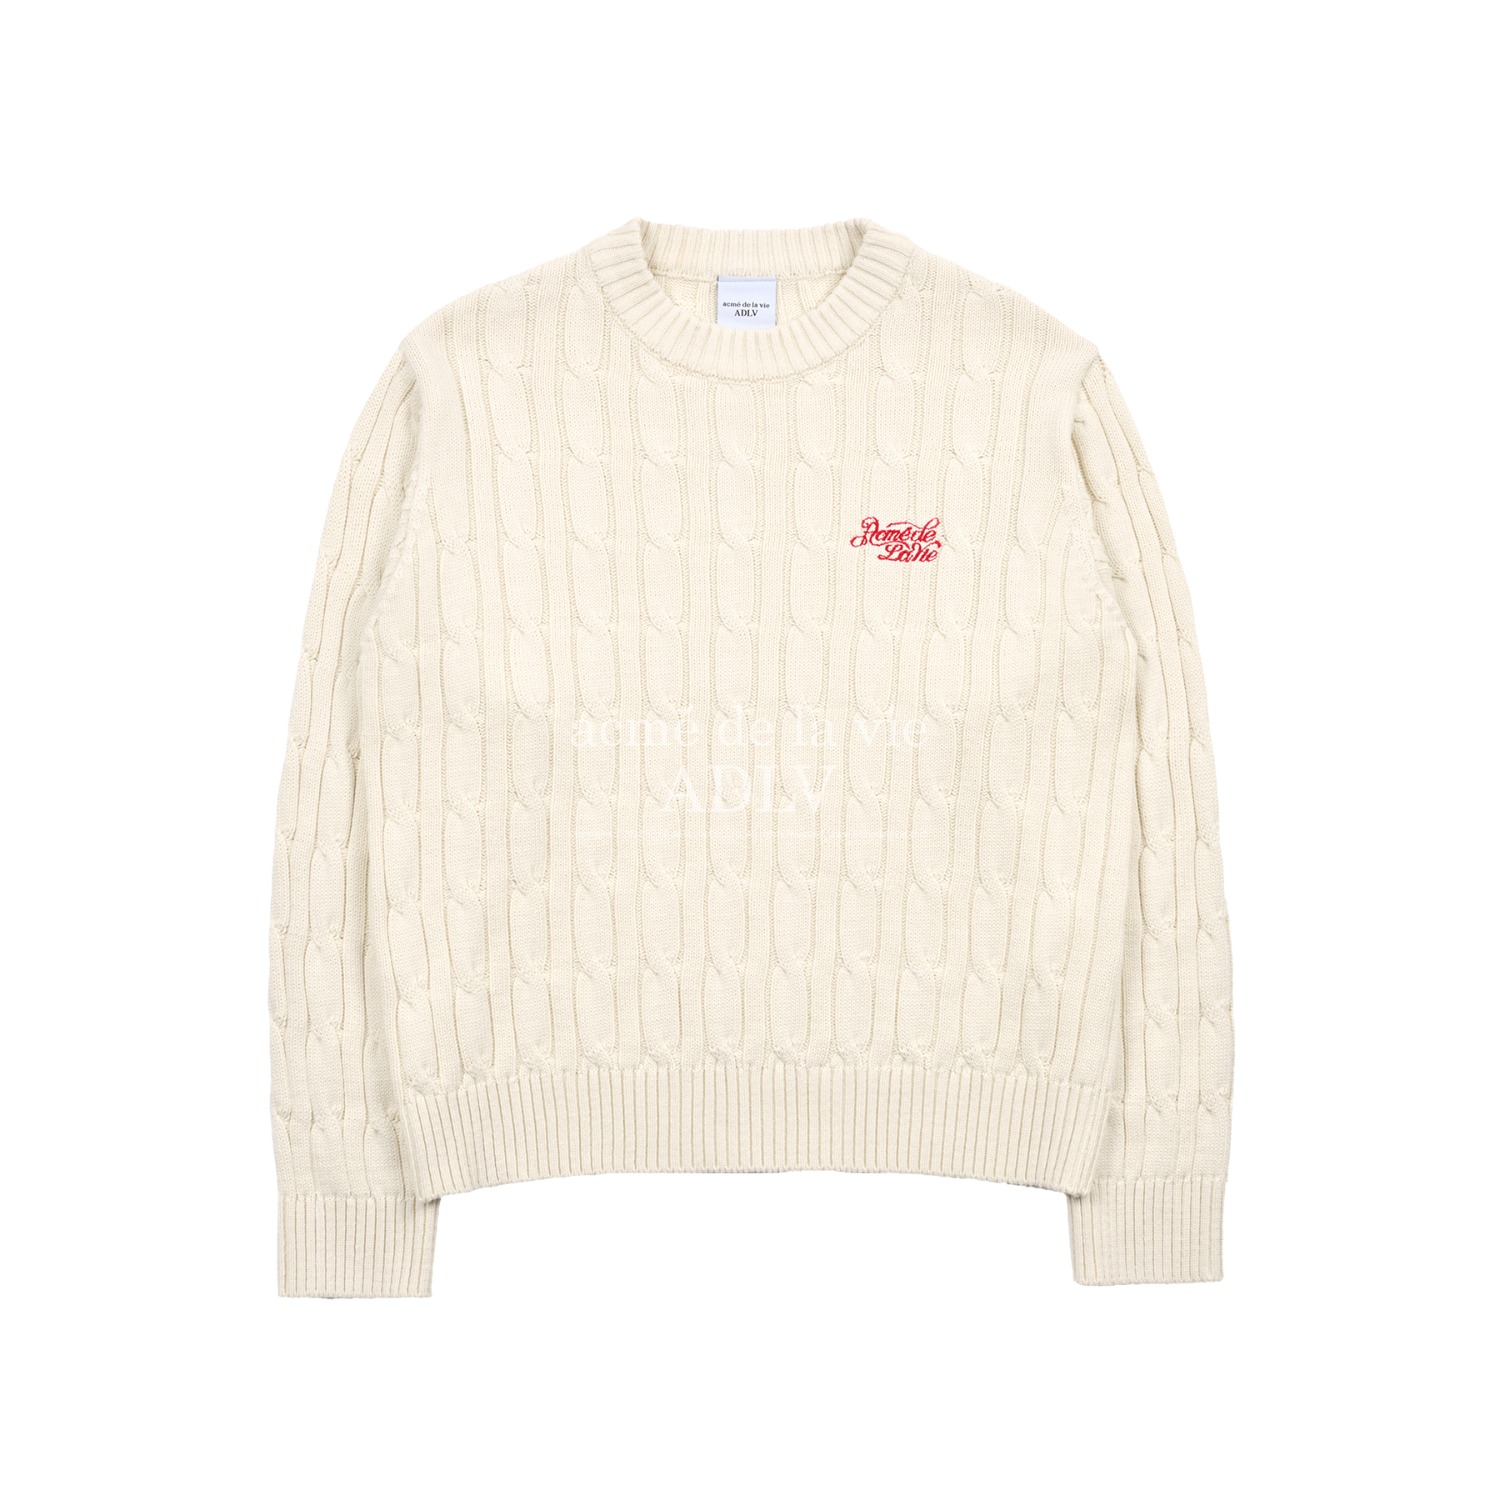 ADLV-[아크메드라비] SCRIPT LOGO EMBROIDERY CABLE KNIT IVORY